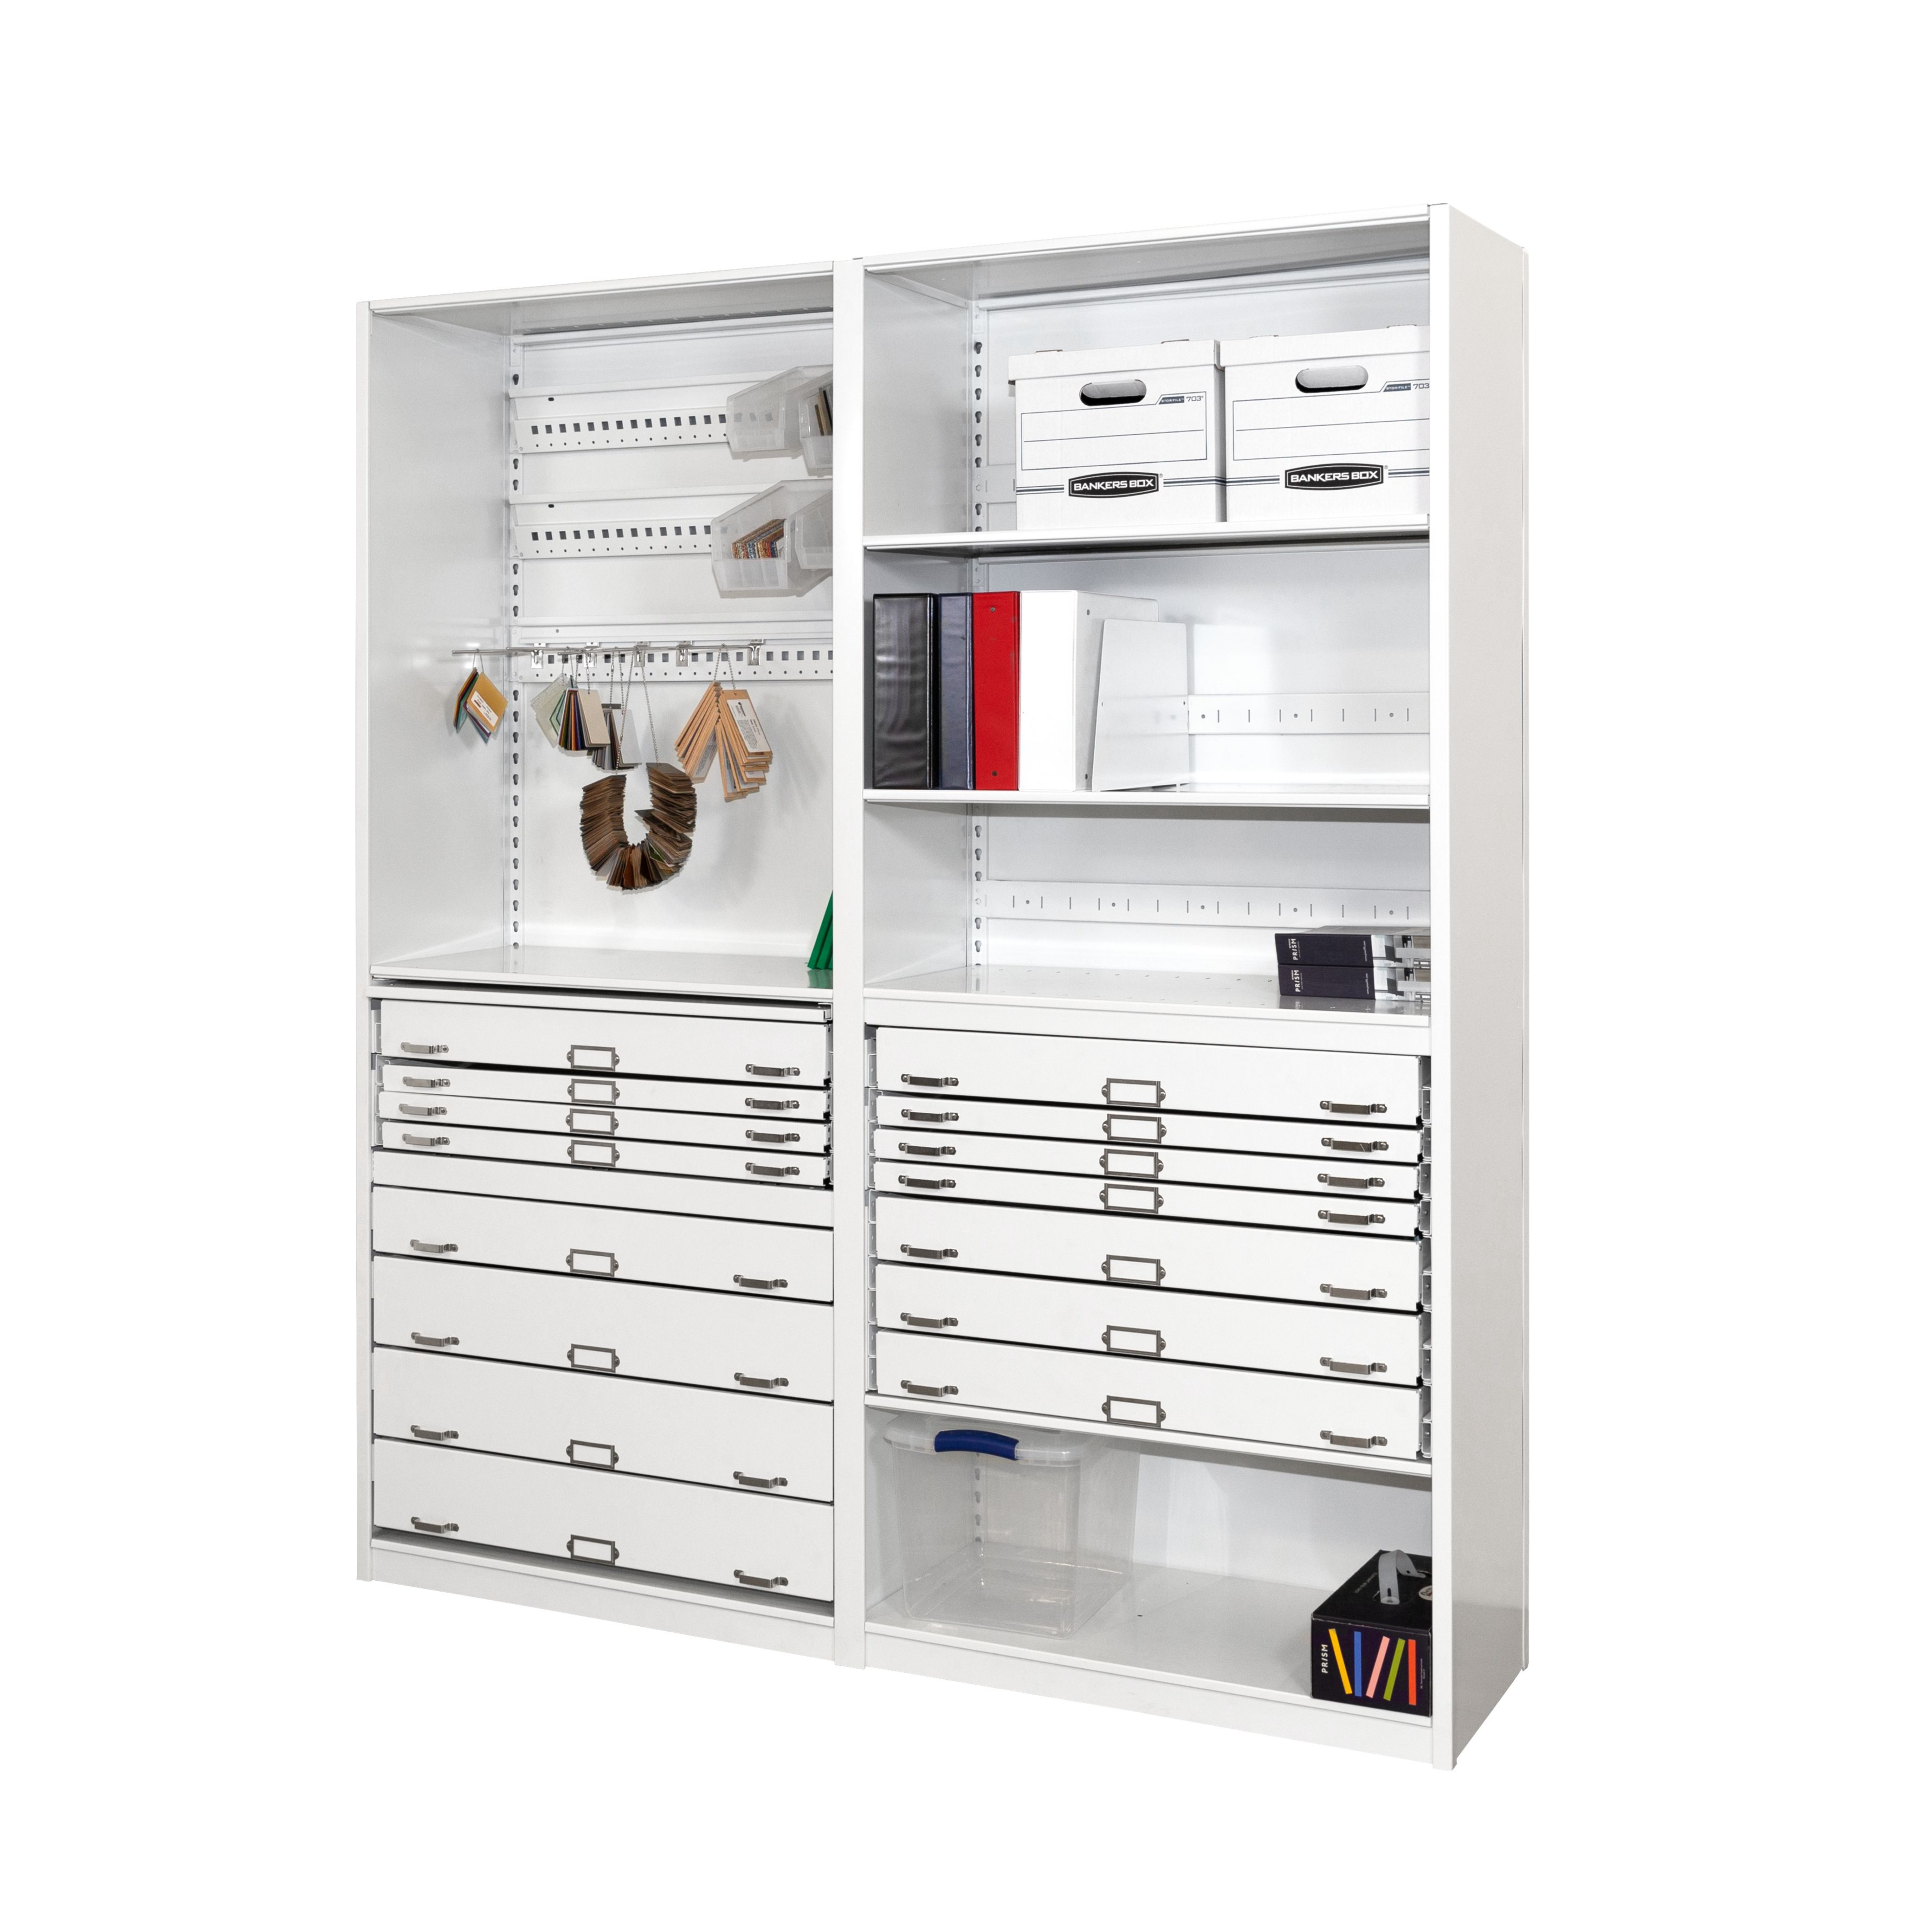 Adaptability is one of the key advantages of modular shelving systems.